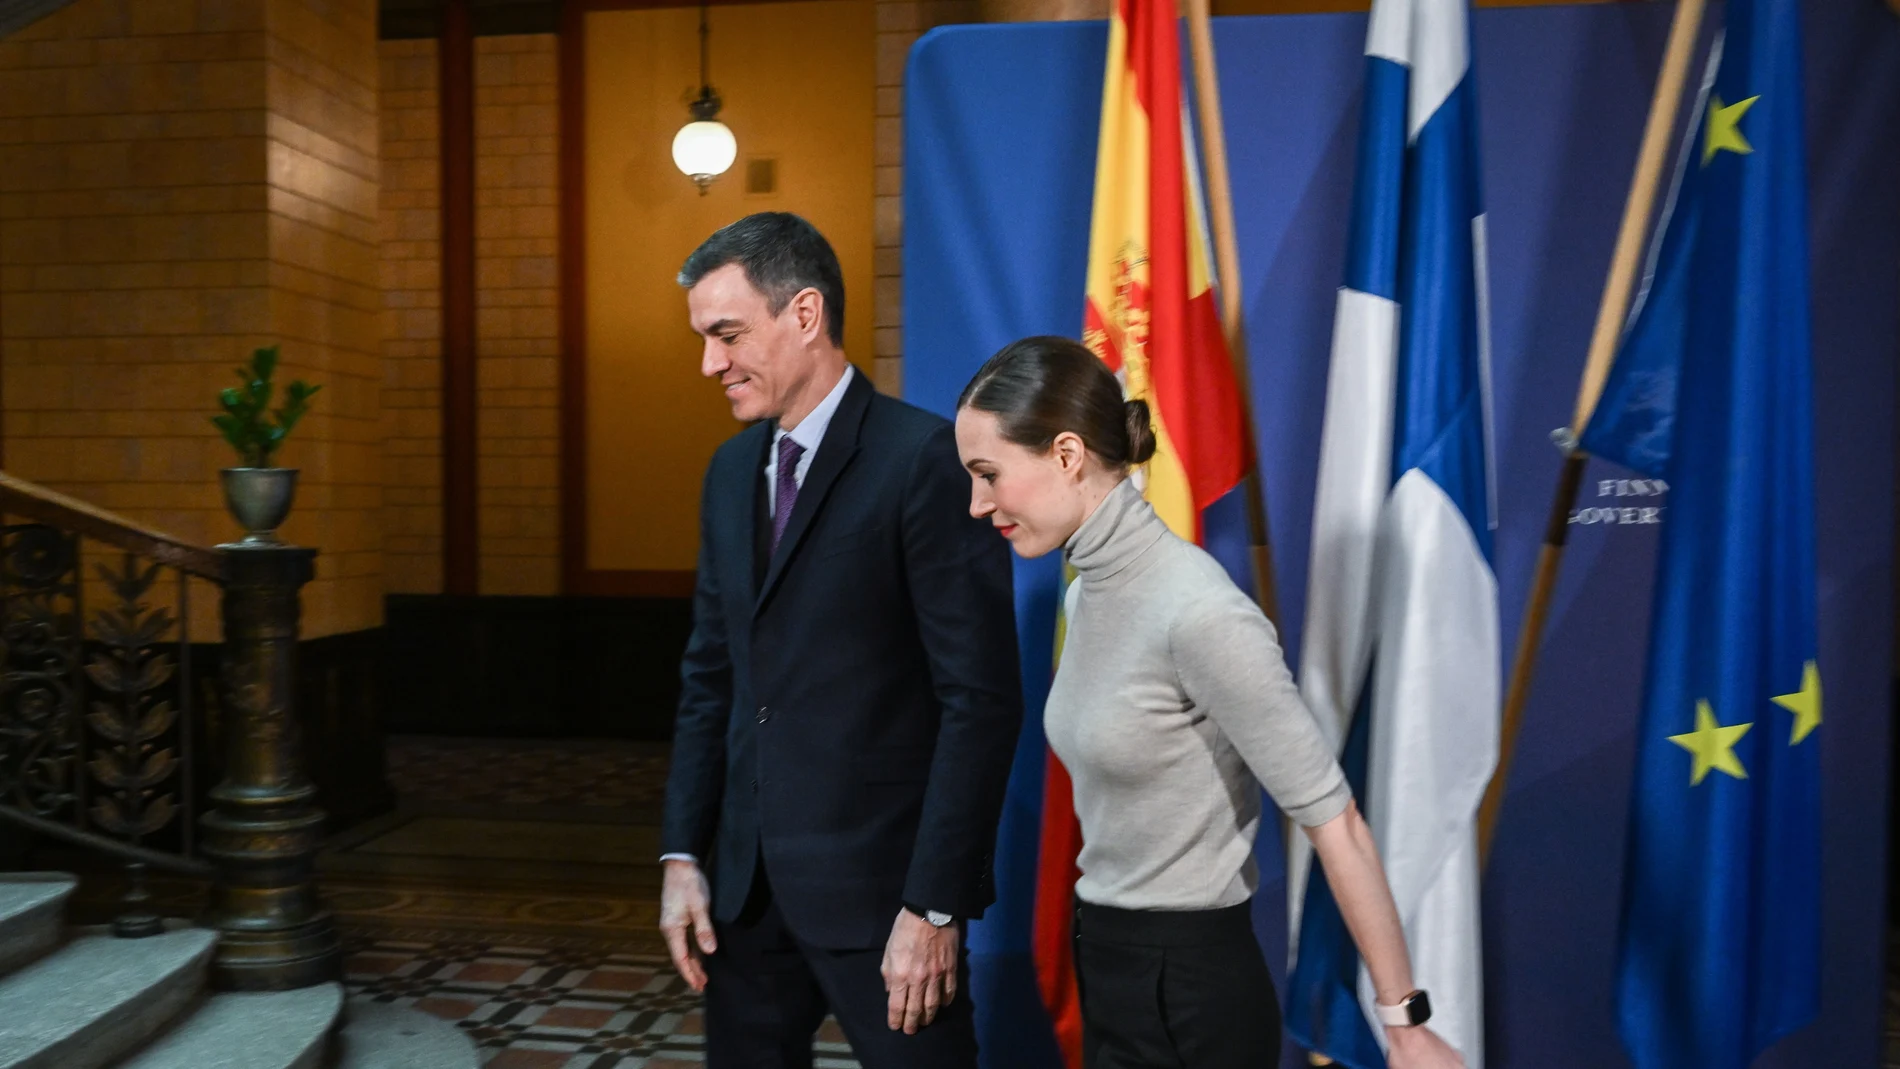 Finland's Prime Minister Sanna Marin (R) welcomes Spanish Prime Minister Pedro Sanchez (L) for their meeting in Helsinki, Finland, 03 March 2023. 